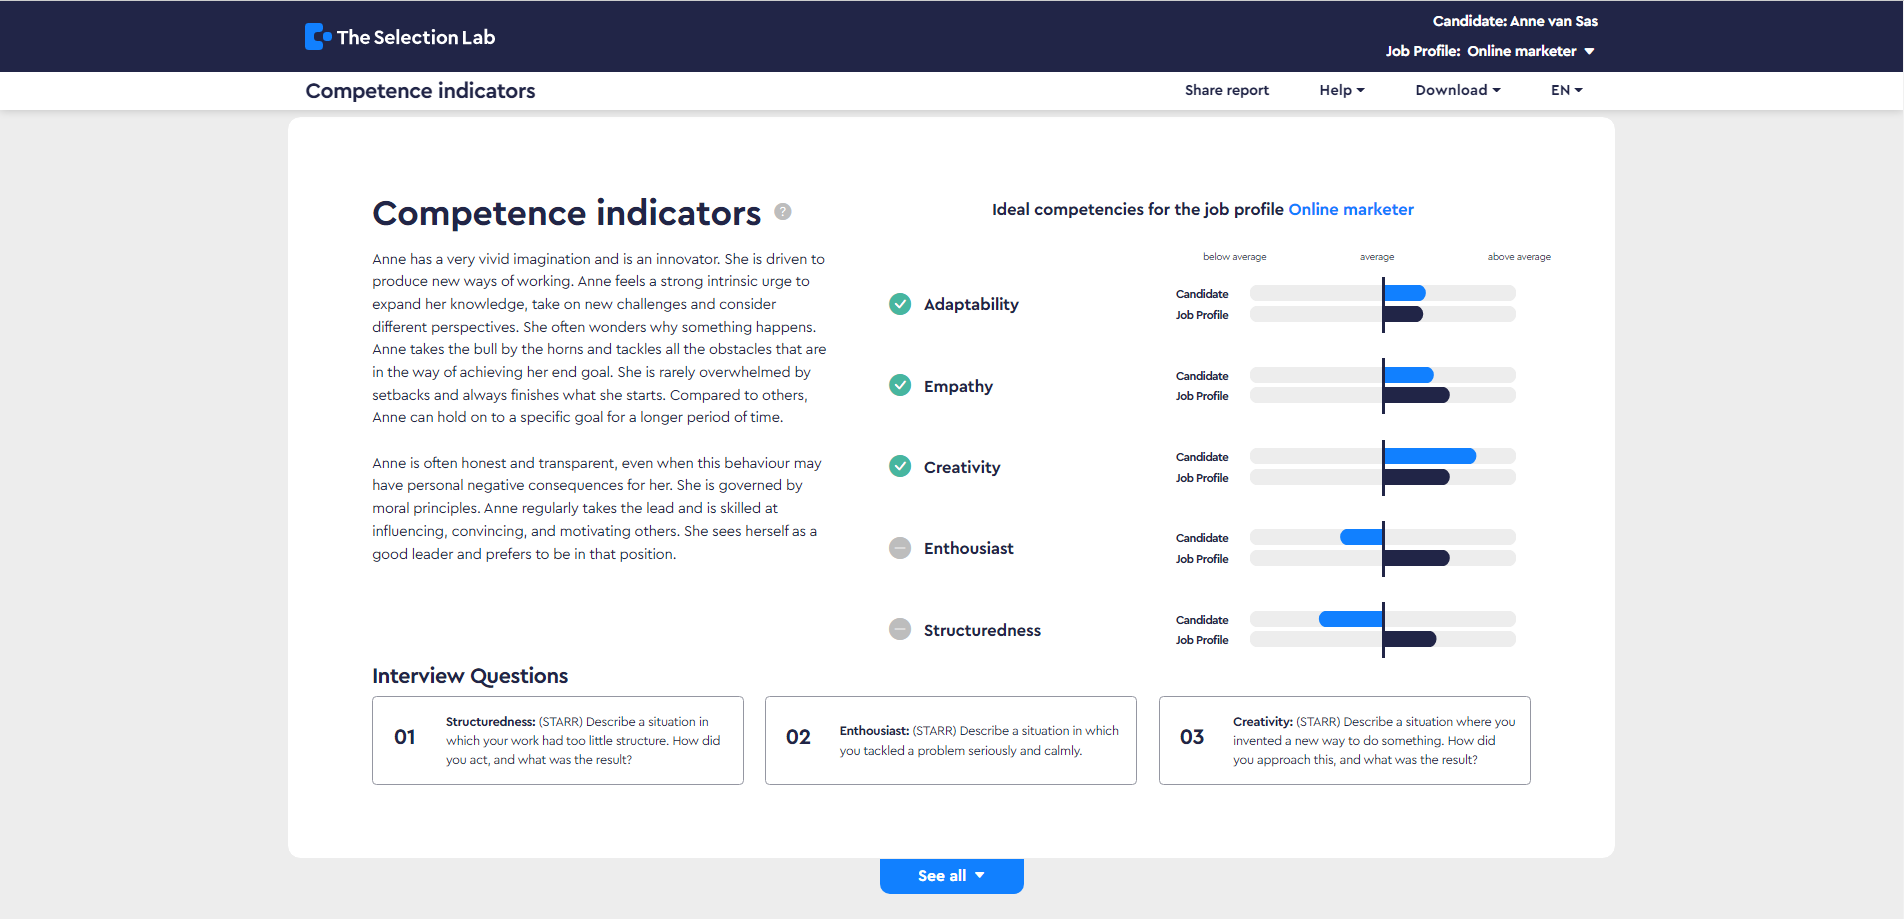 Competence indicators section